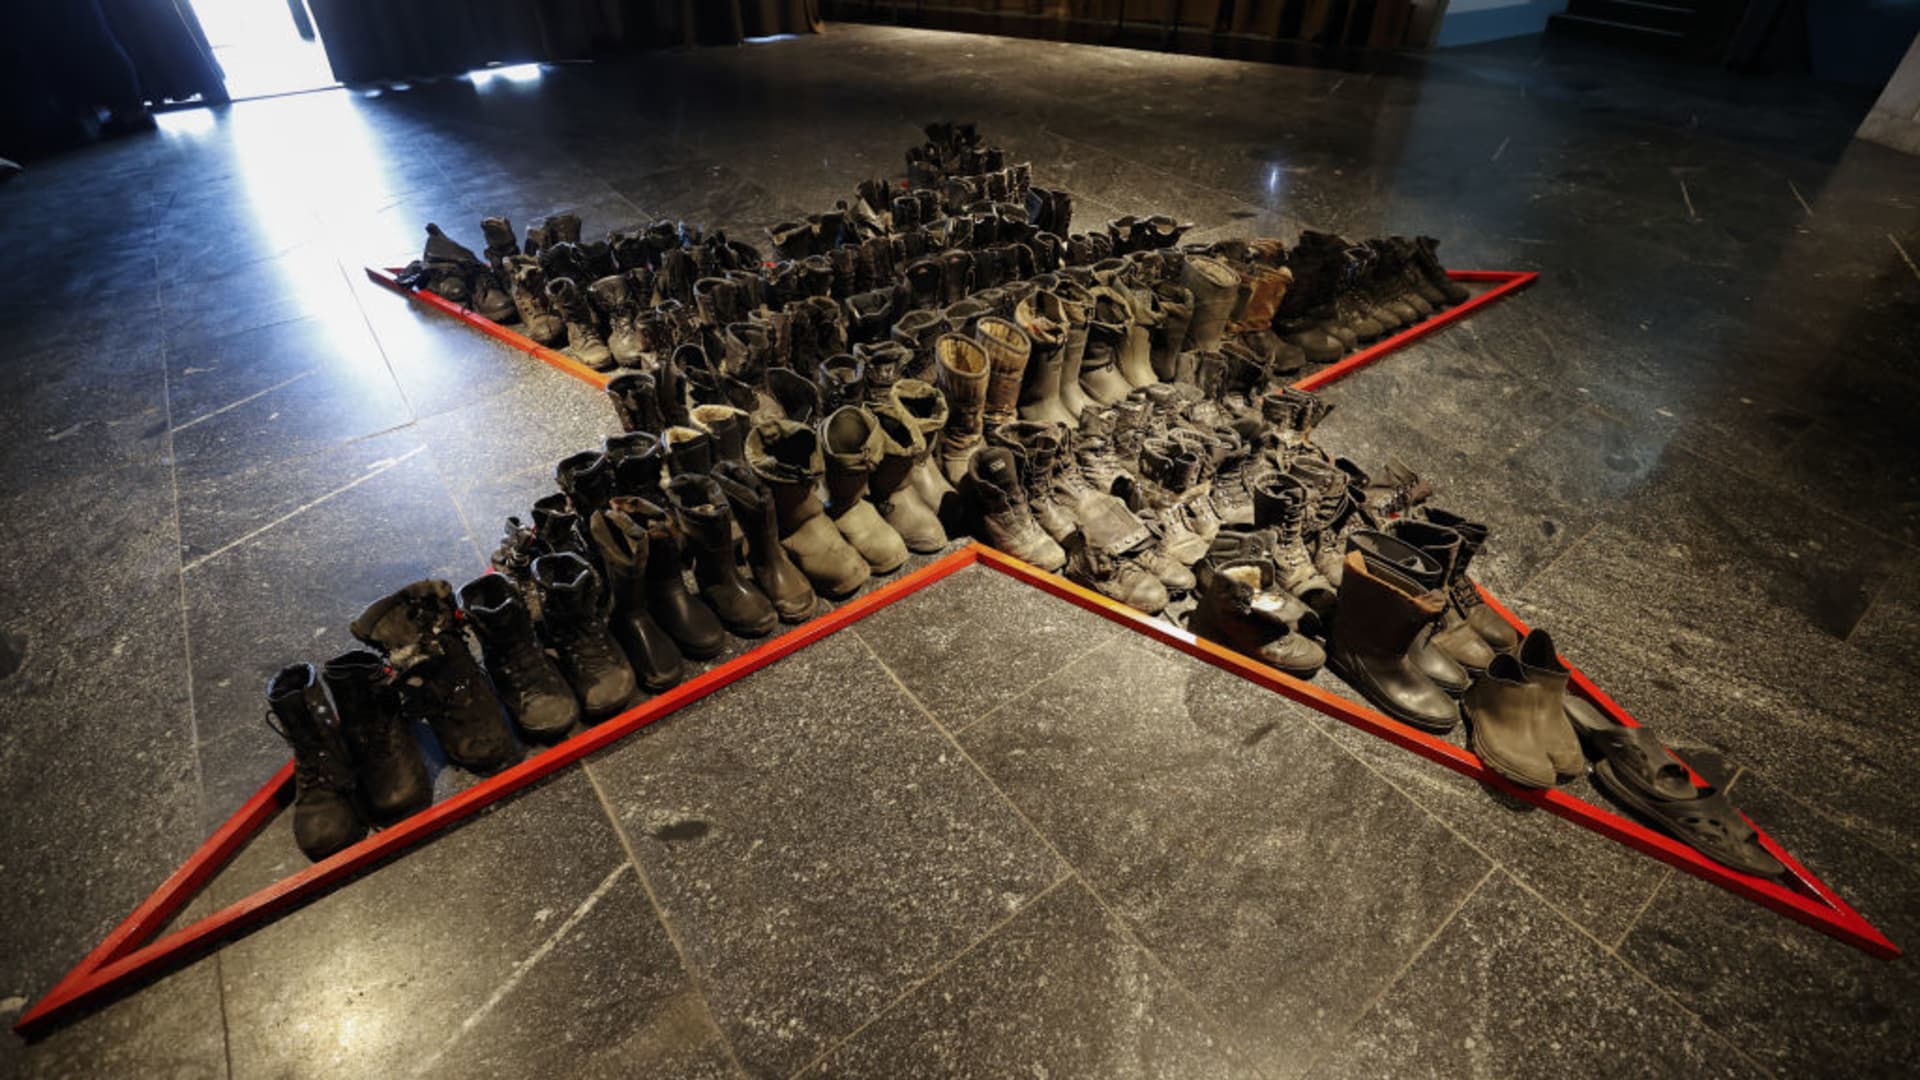 Military boots of Russian military forces are seen at National Museum of the History of Ukraine in World War II in Kyiv, Ukraine on May 10, 2022.